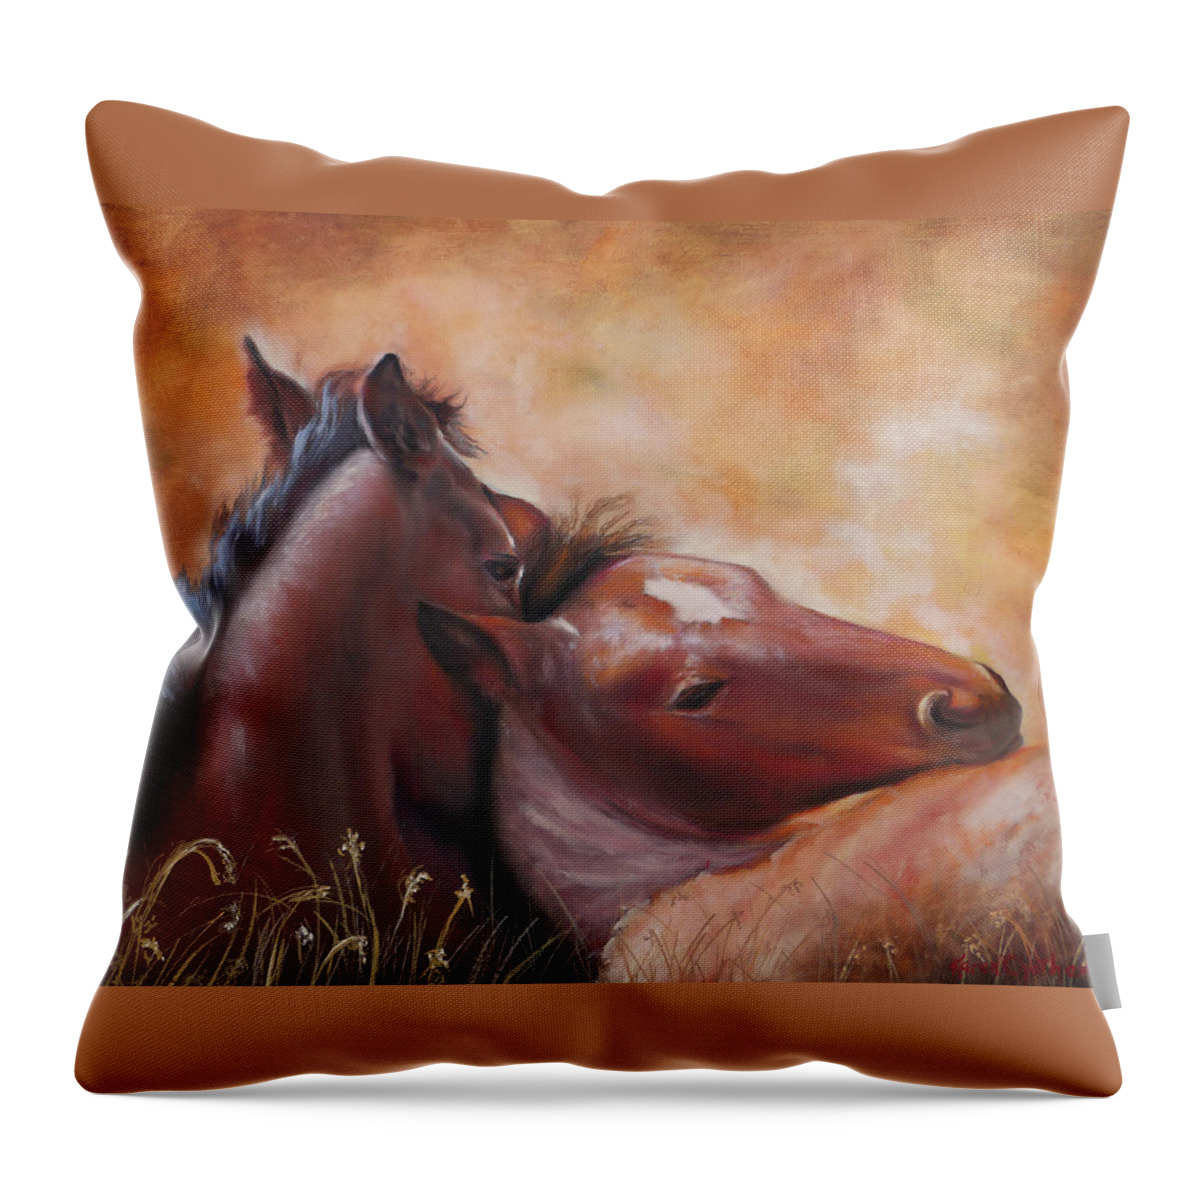 Southwestern Equine Art Throw Pillow featuring the painting Morning Foals by Karen Kennedy Chatham